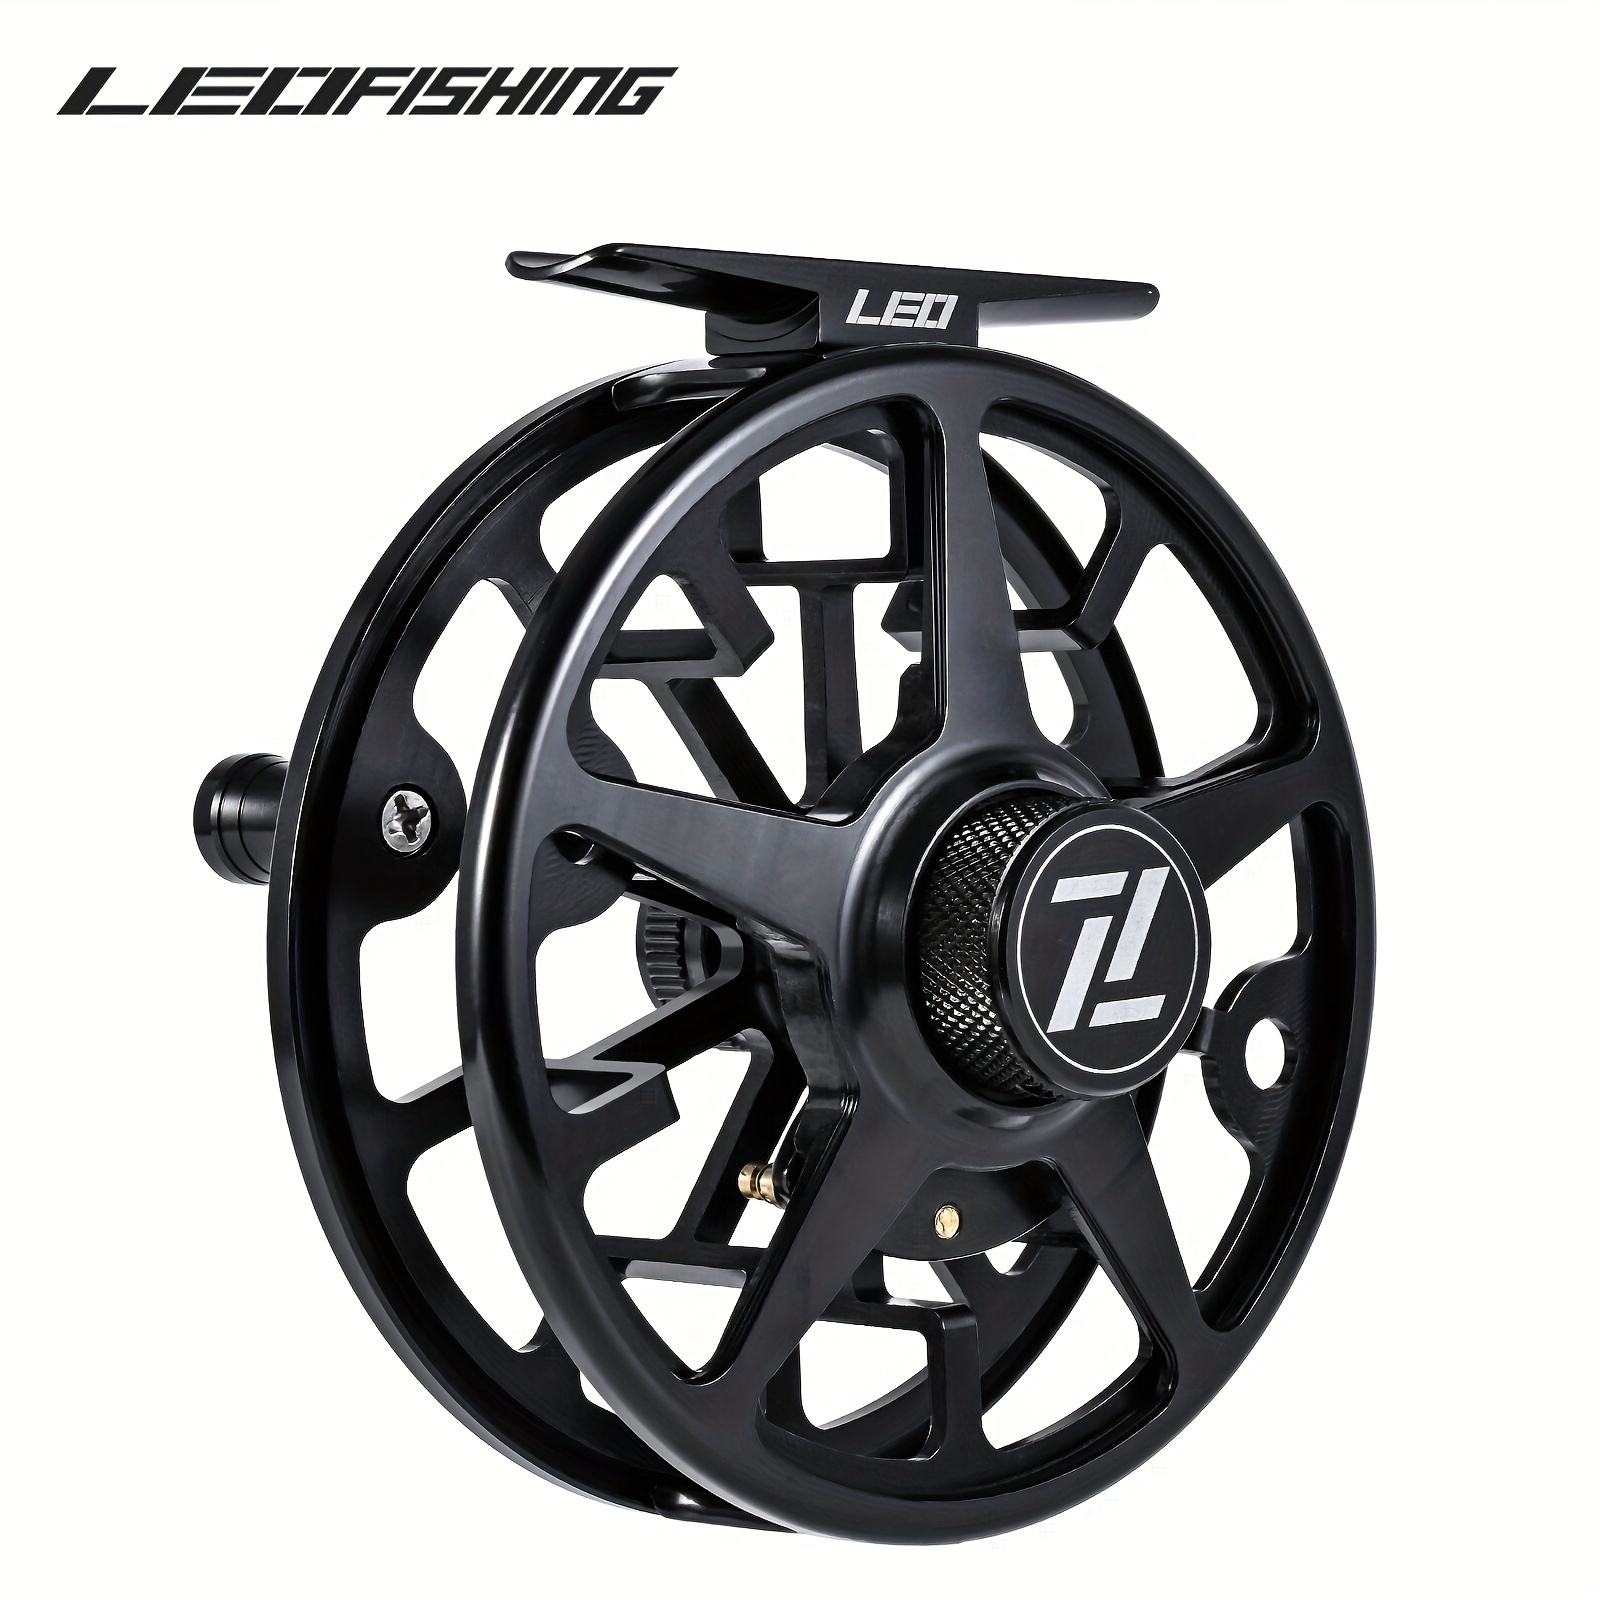 Fly Fishing Reel, Right-Handed Aluminium Alloy, Smooth ICE Fishing Reels,  Fly Reels, Deep Sea Fishing Deals (Silver, One Size) : : Sports  & Outdoors